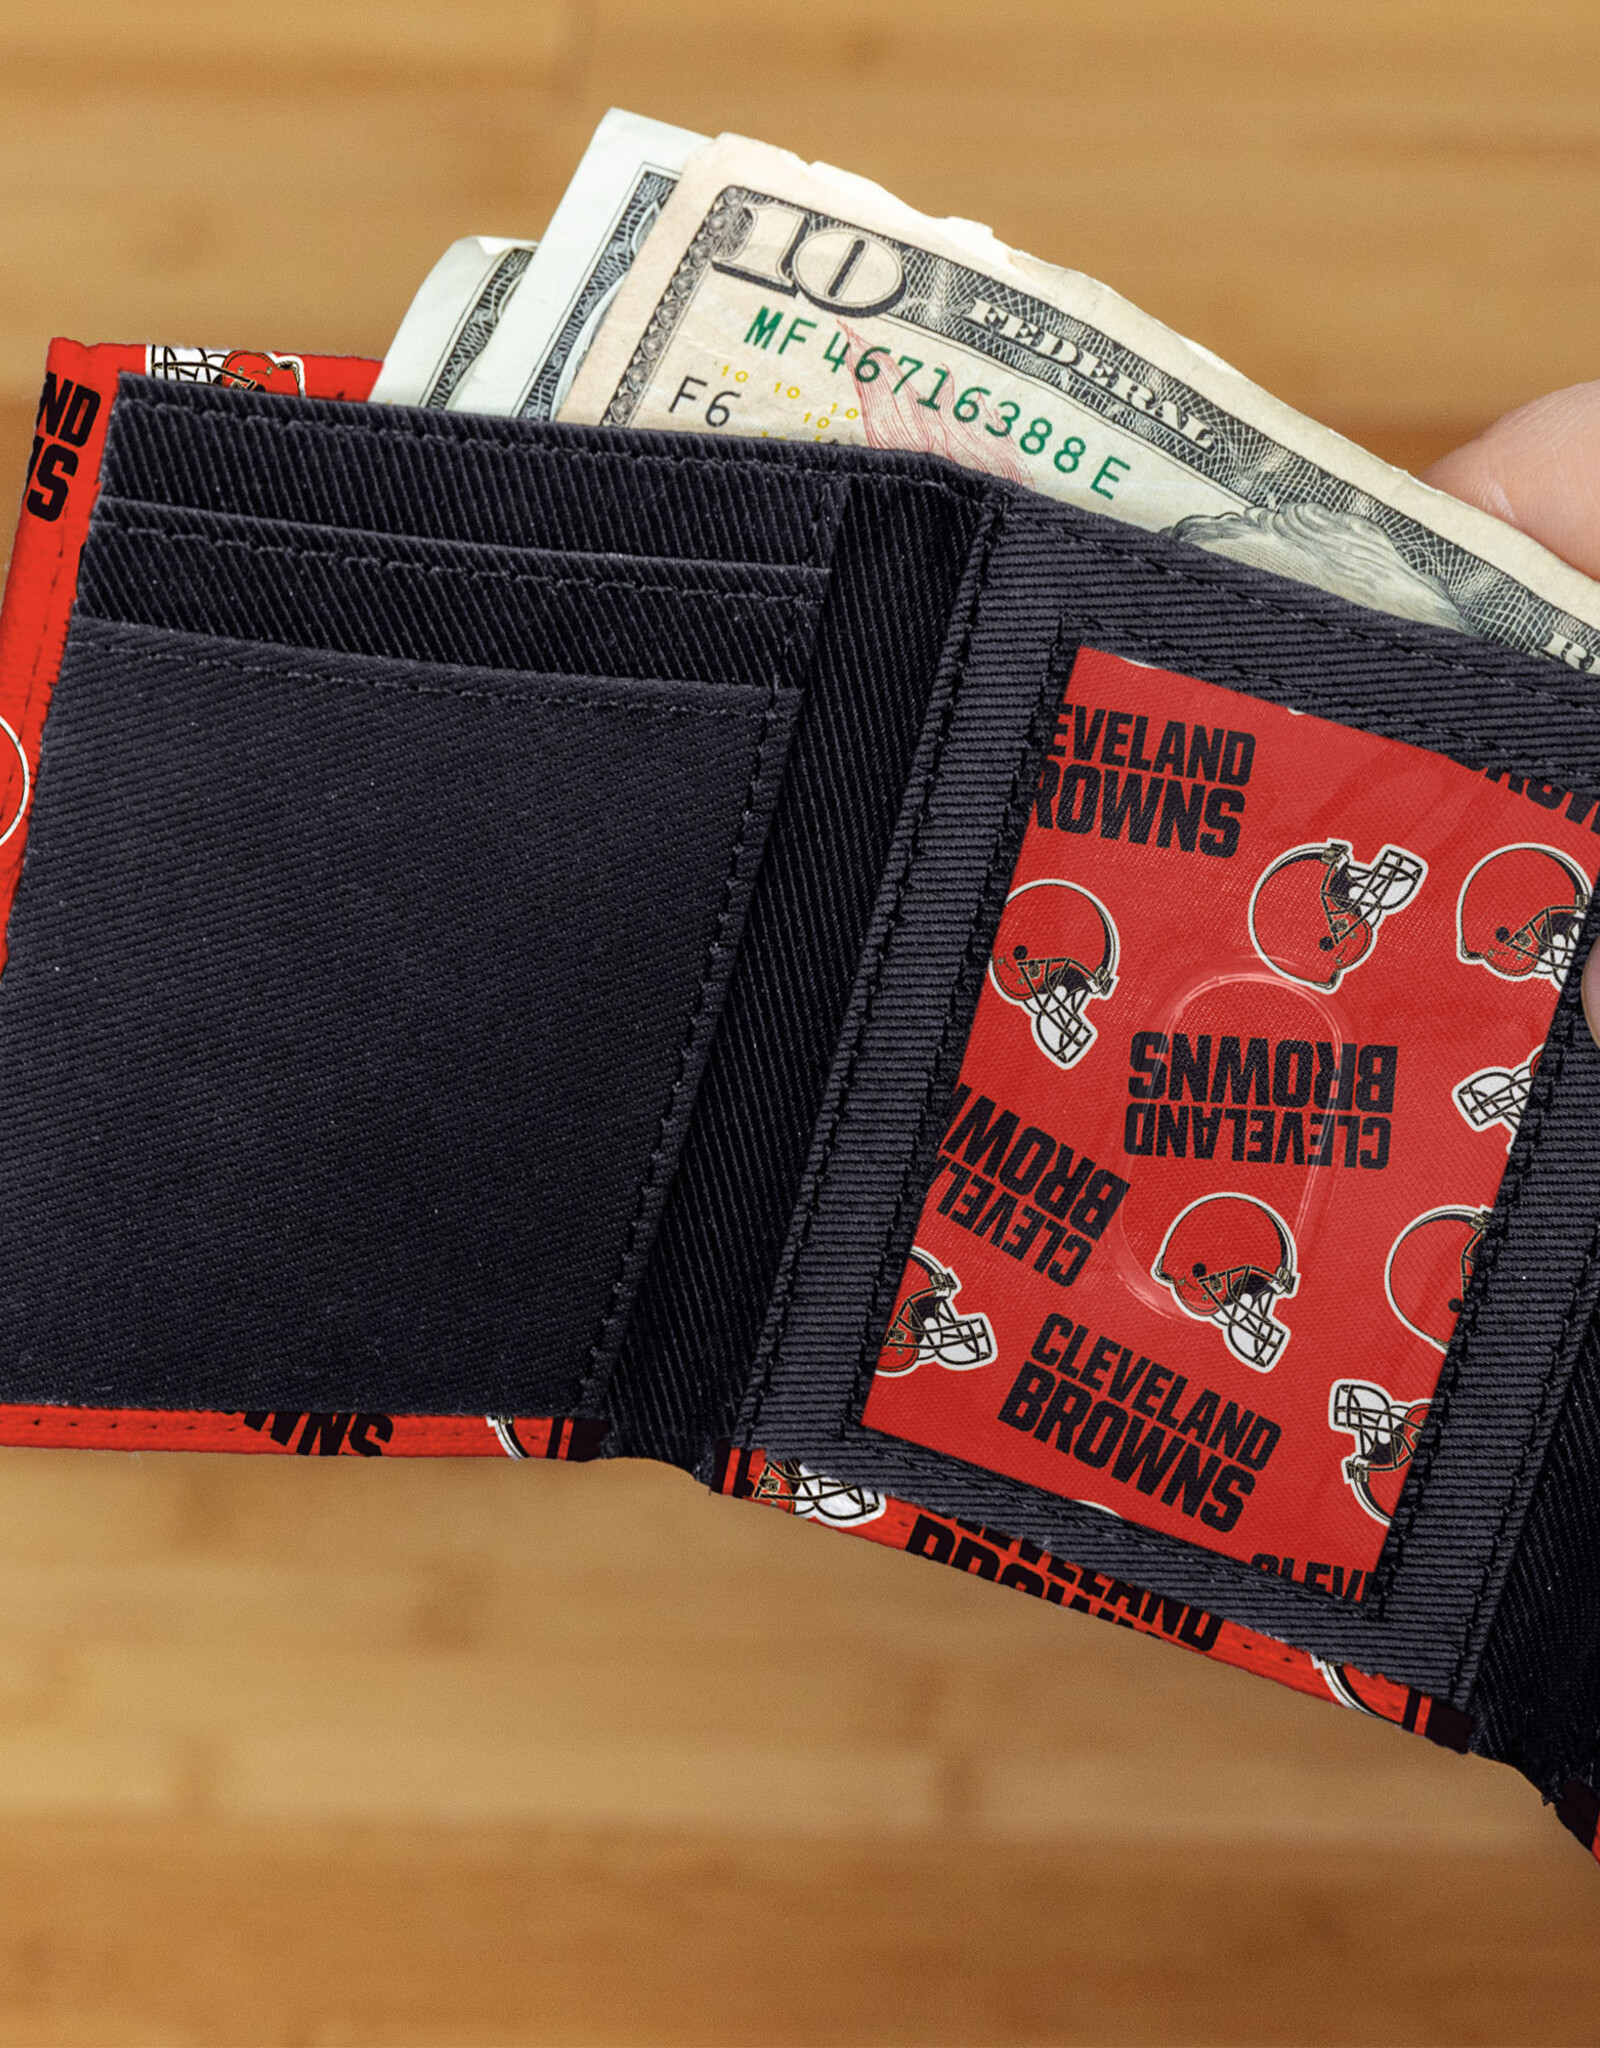 RICO INDUSTRIES Cleveland Browns Canvas Trifold Wallet